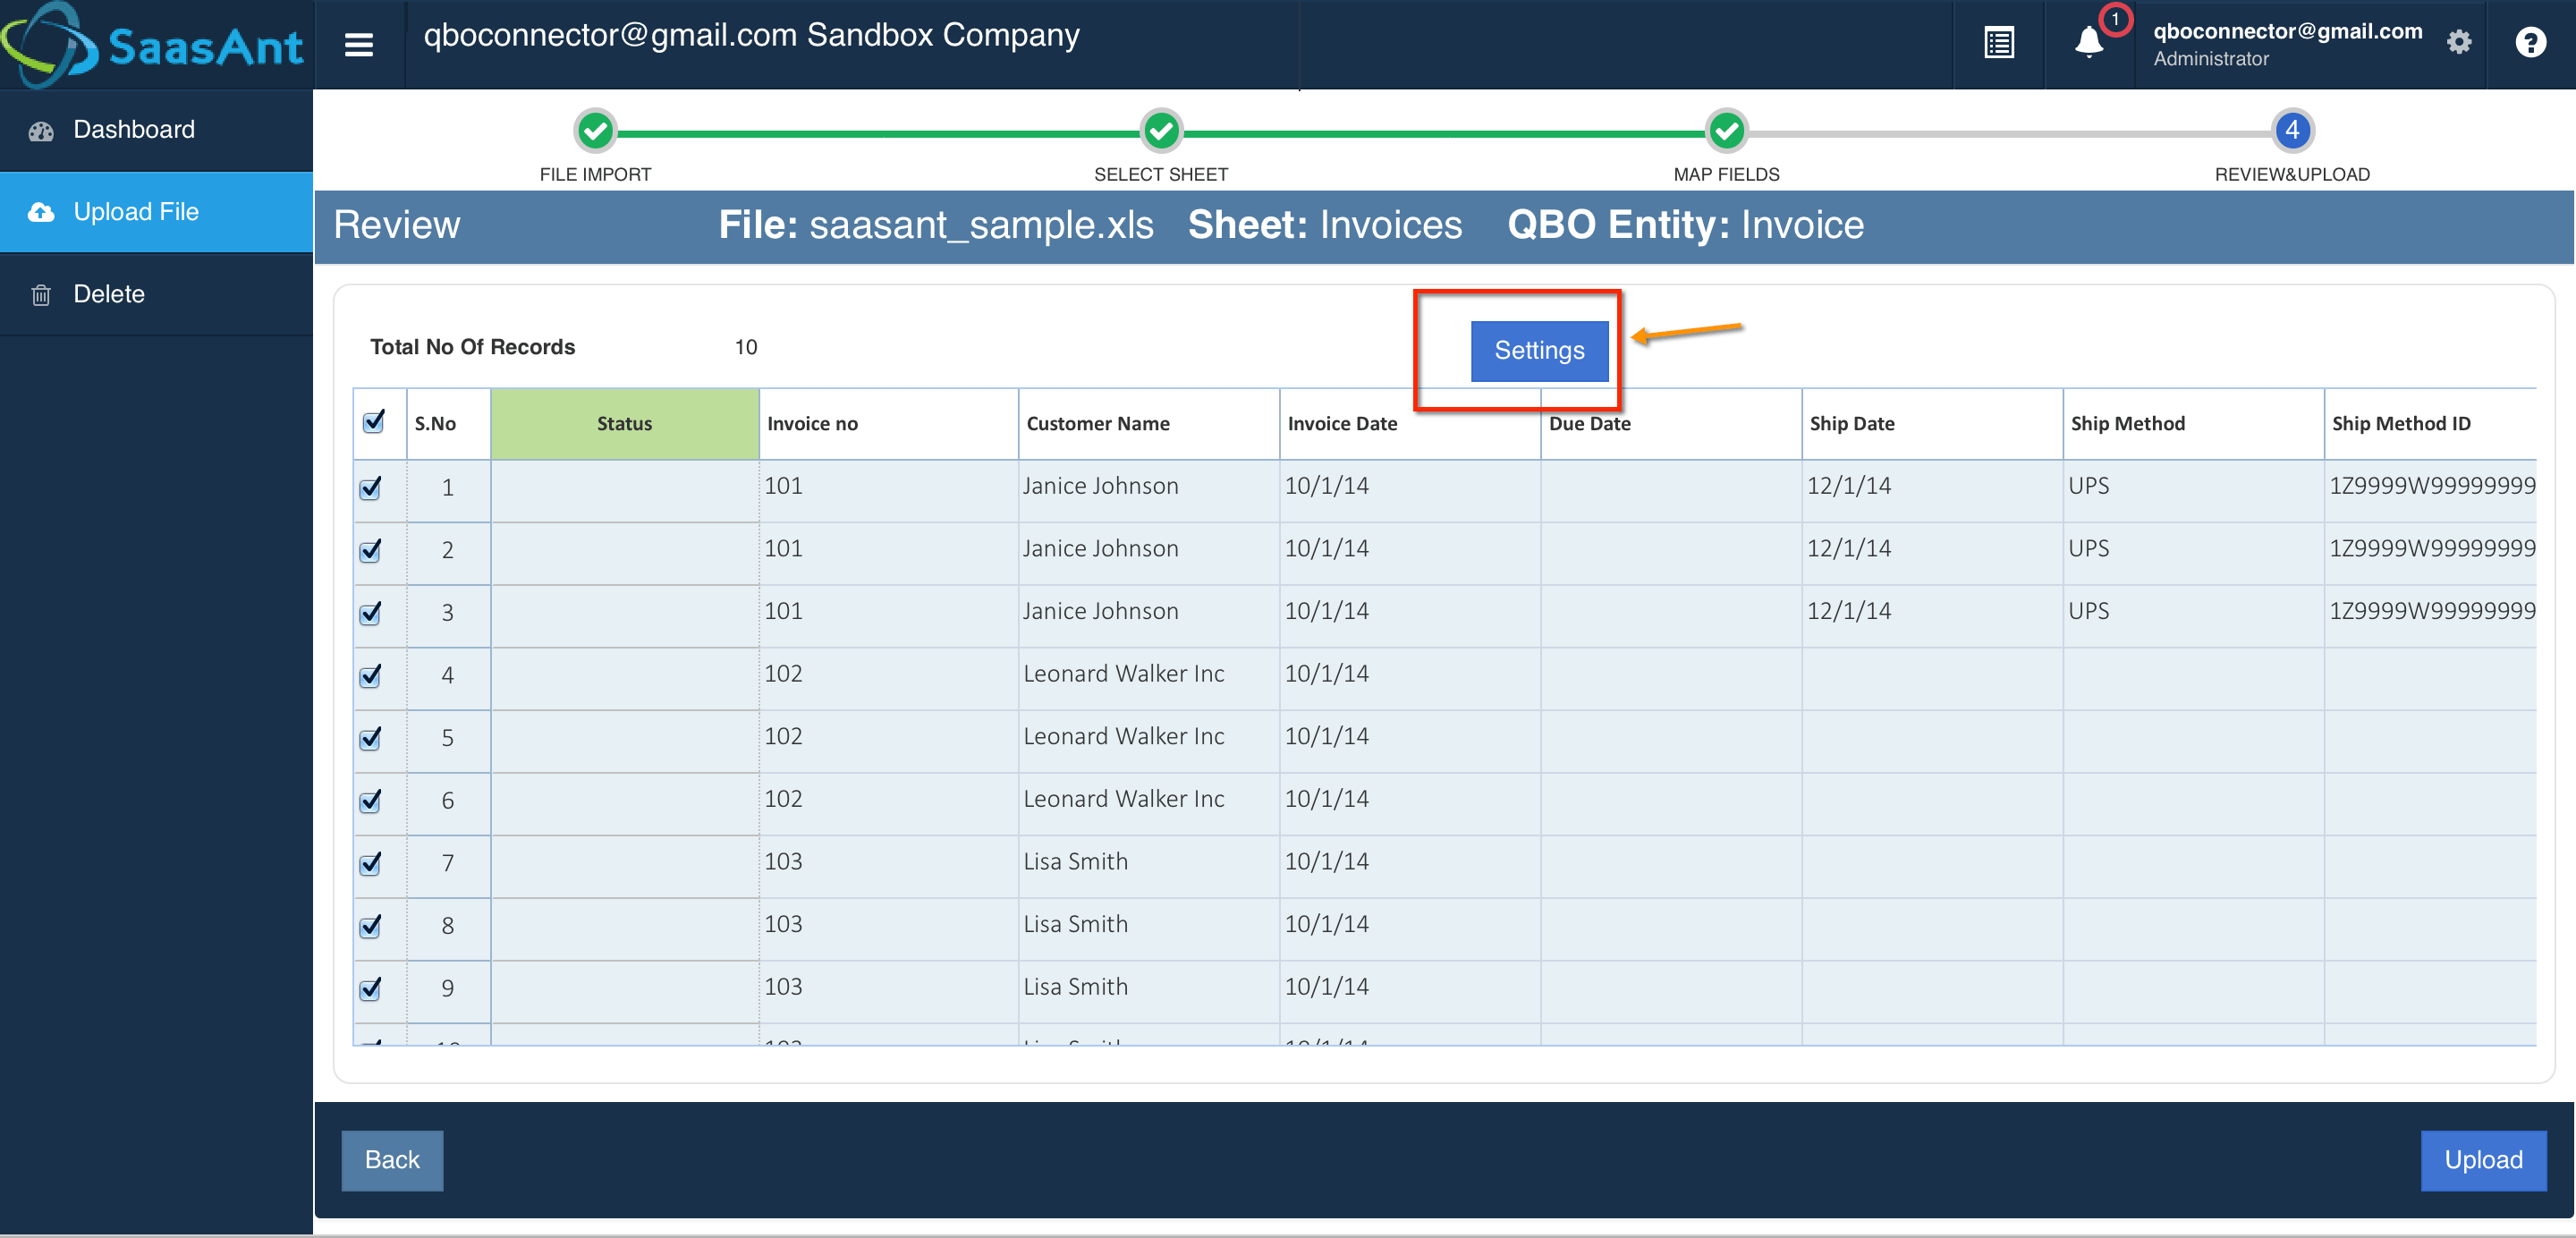 Email Reports for Imports